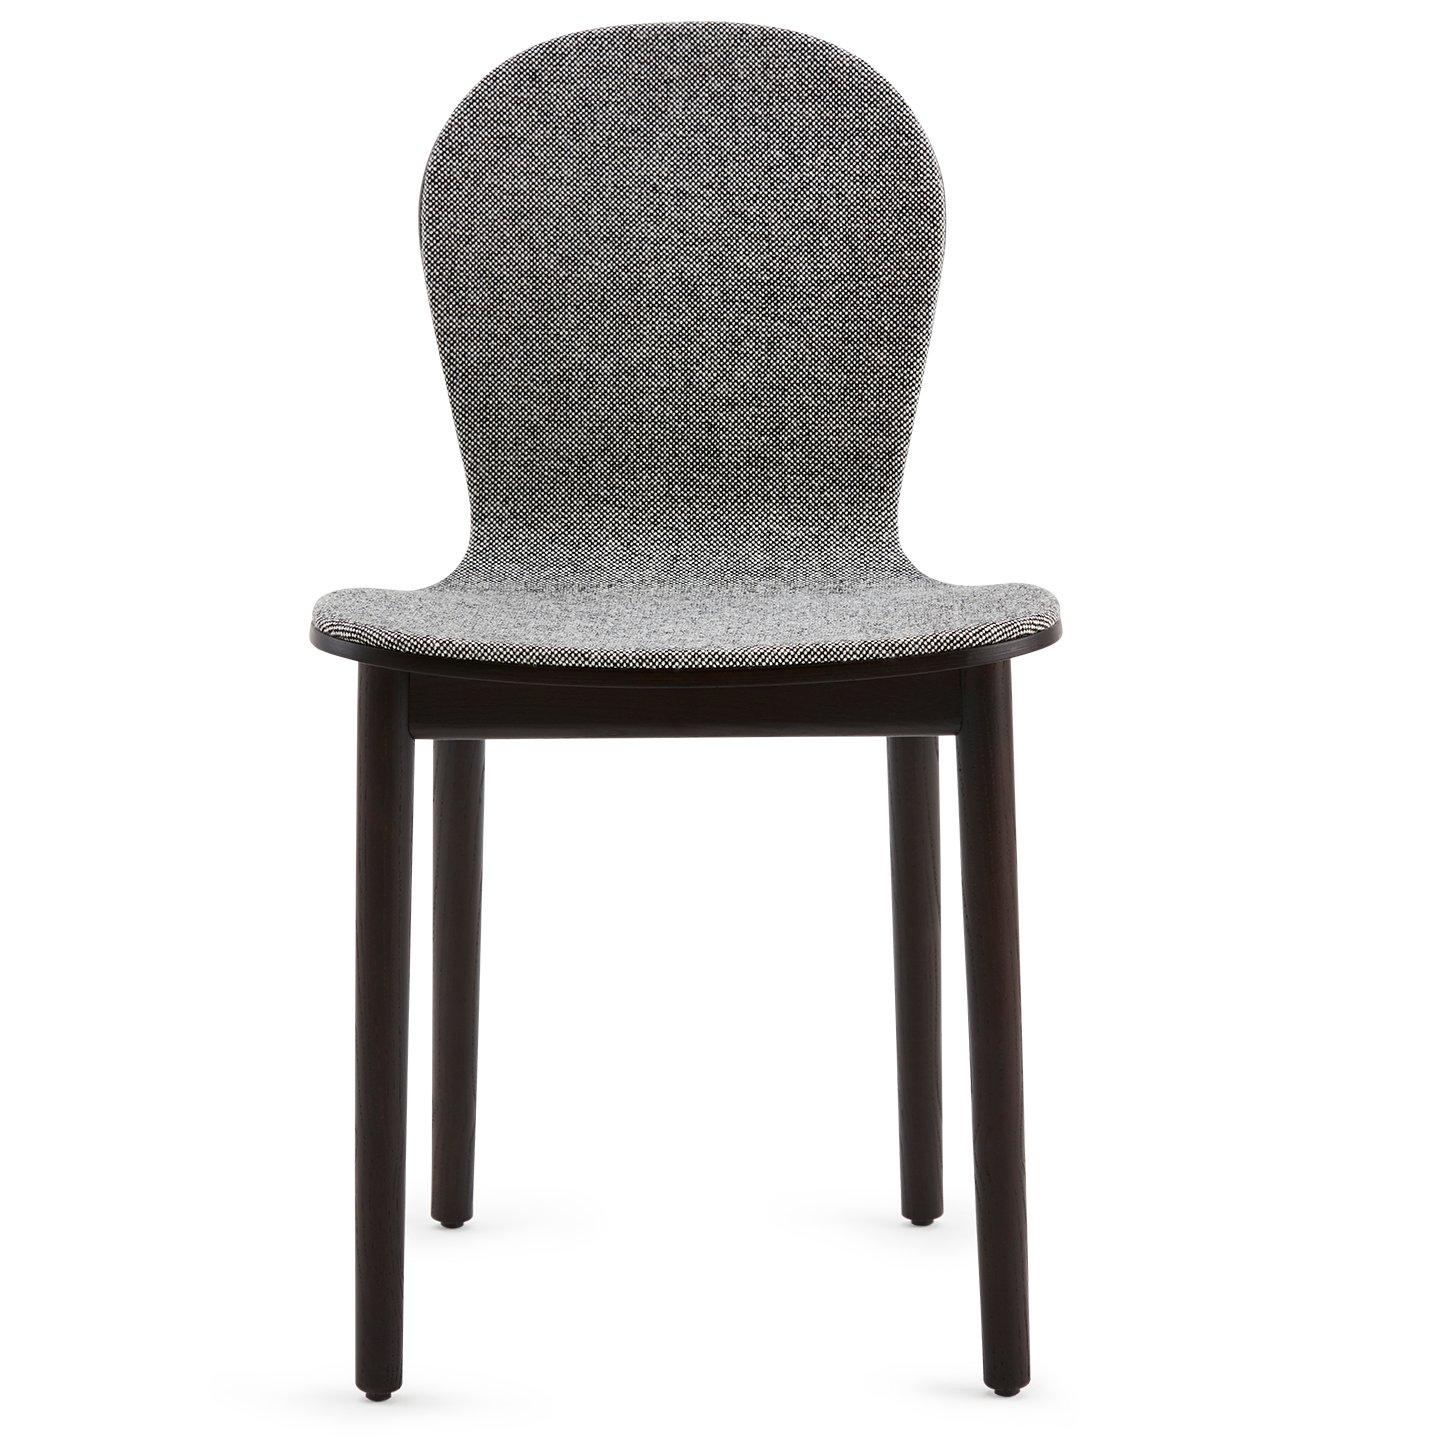 Haworth Bac Two side chair in grey and dark brown front view